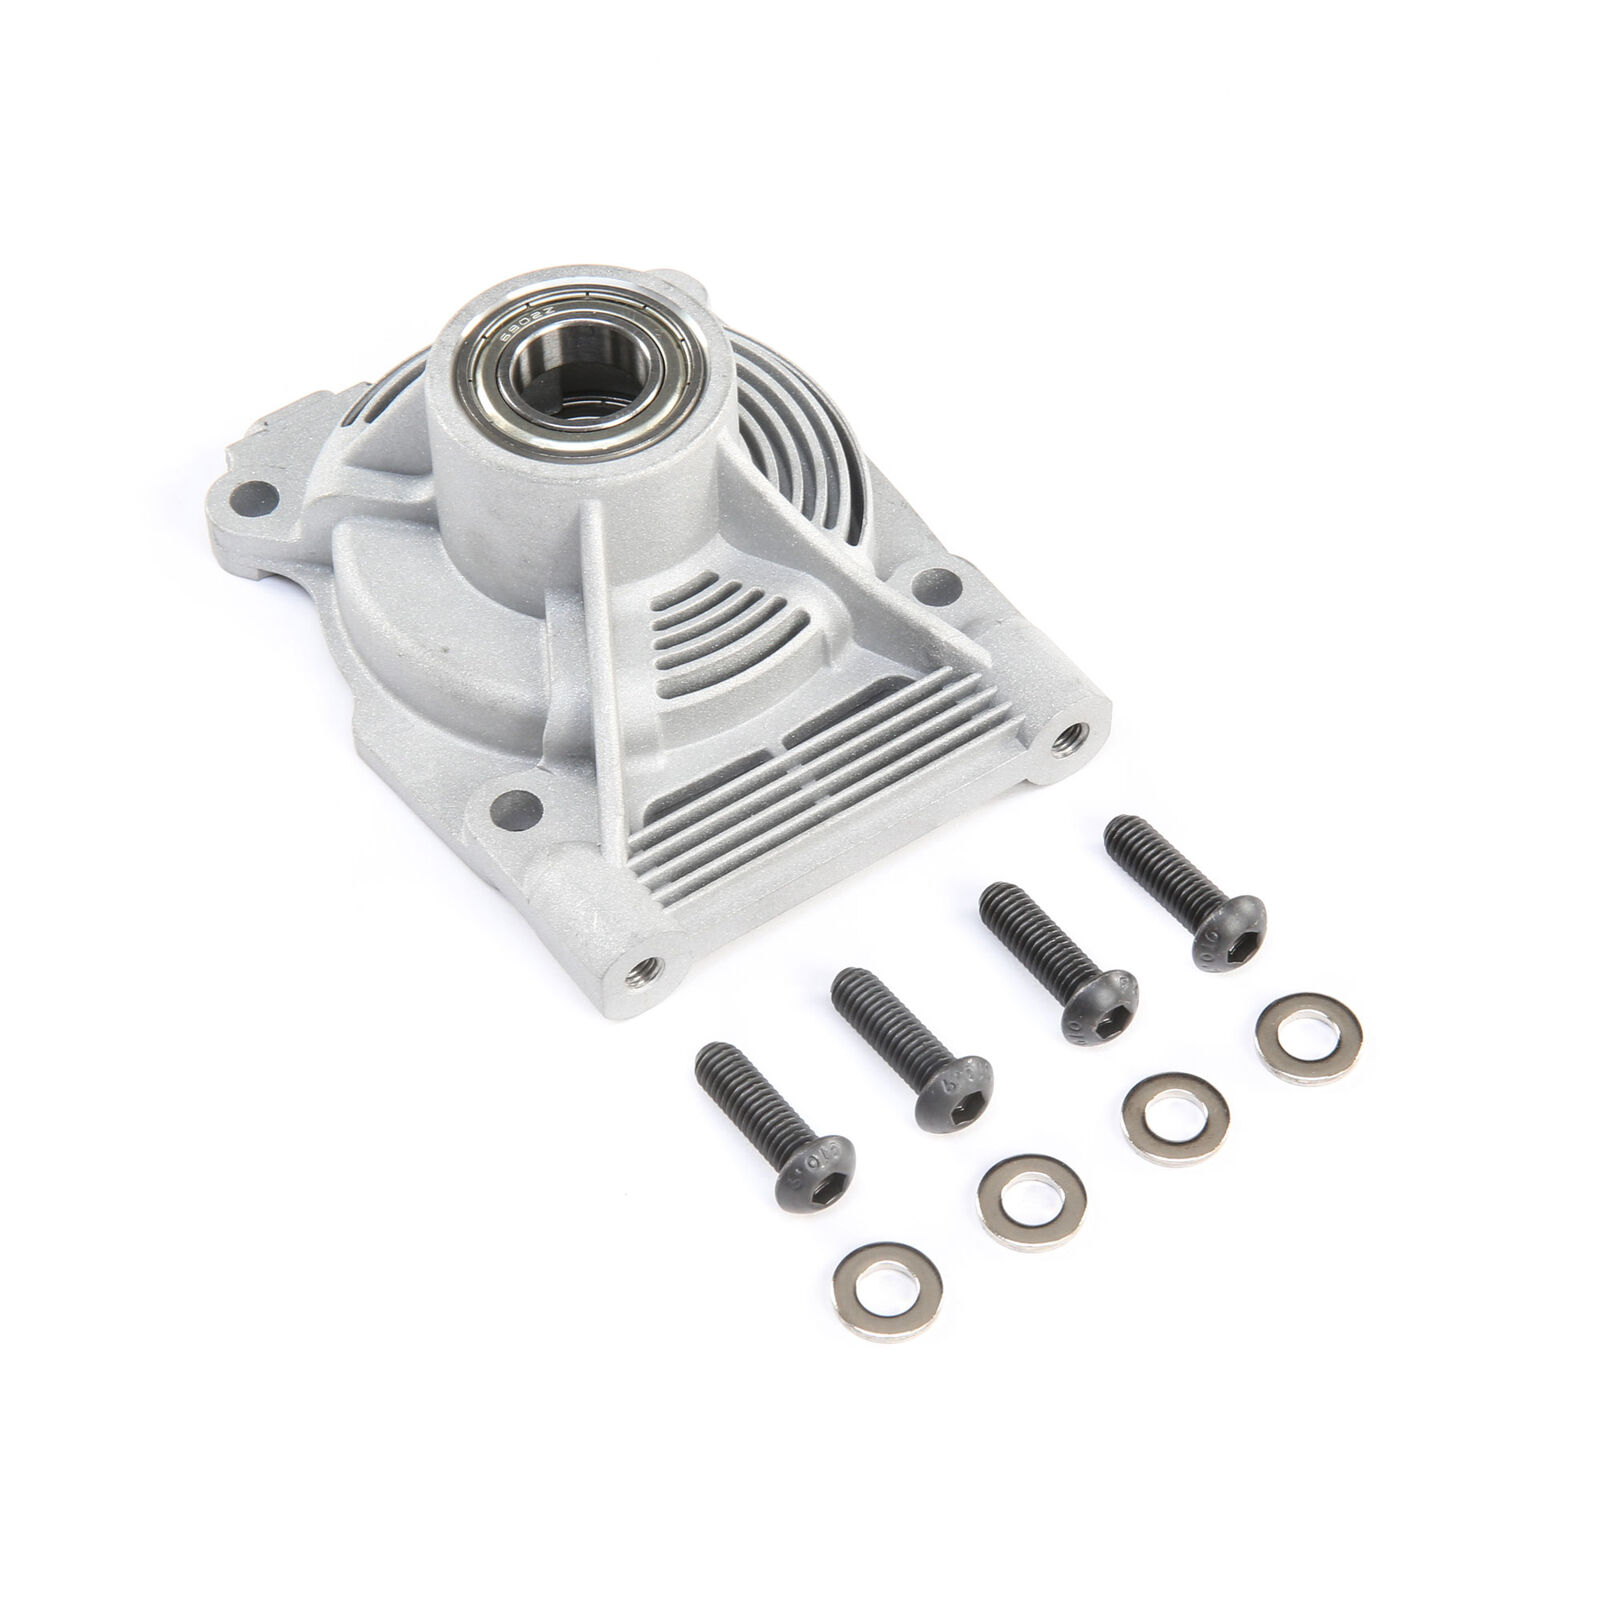 Clutch Mount with Bearings and hardware: 5ive-T 2.0